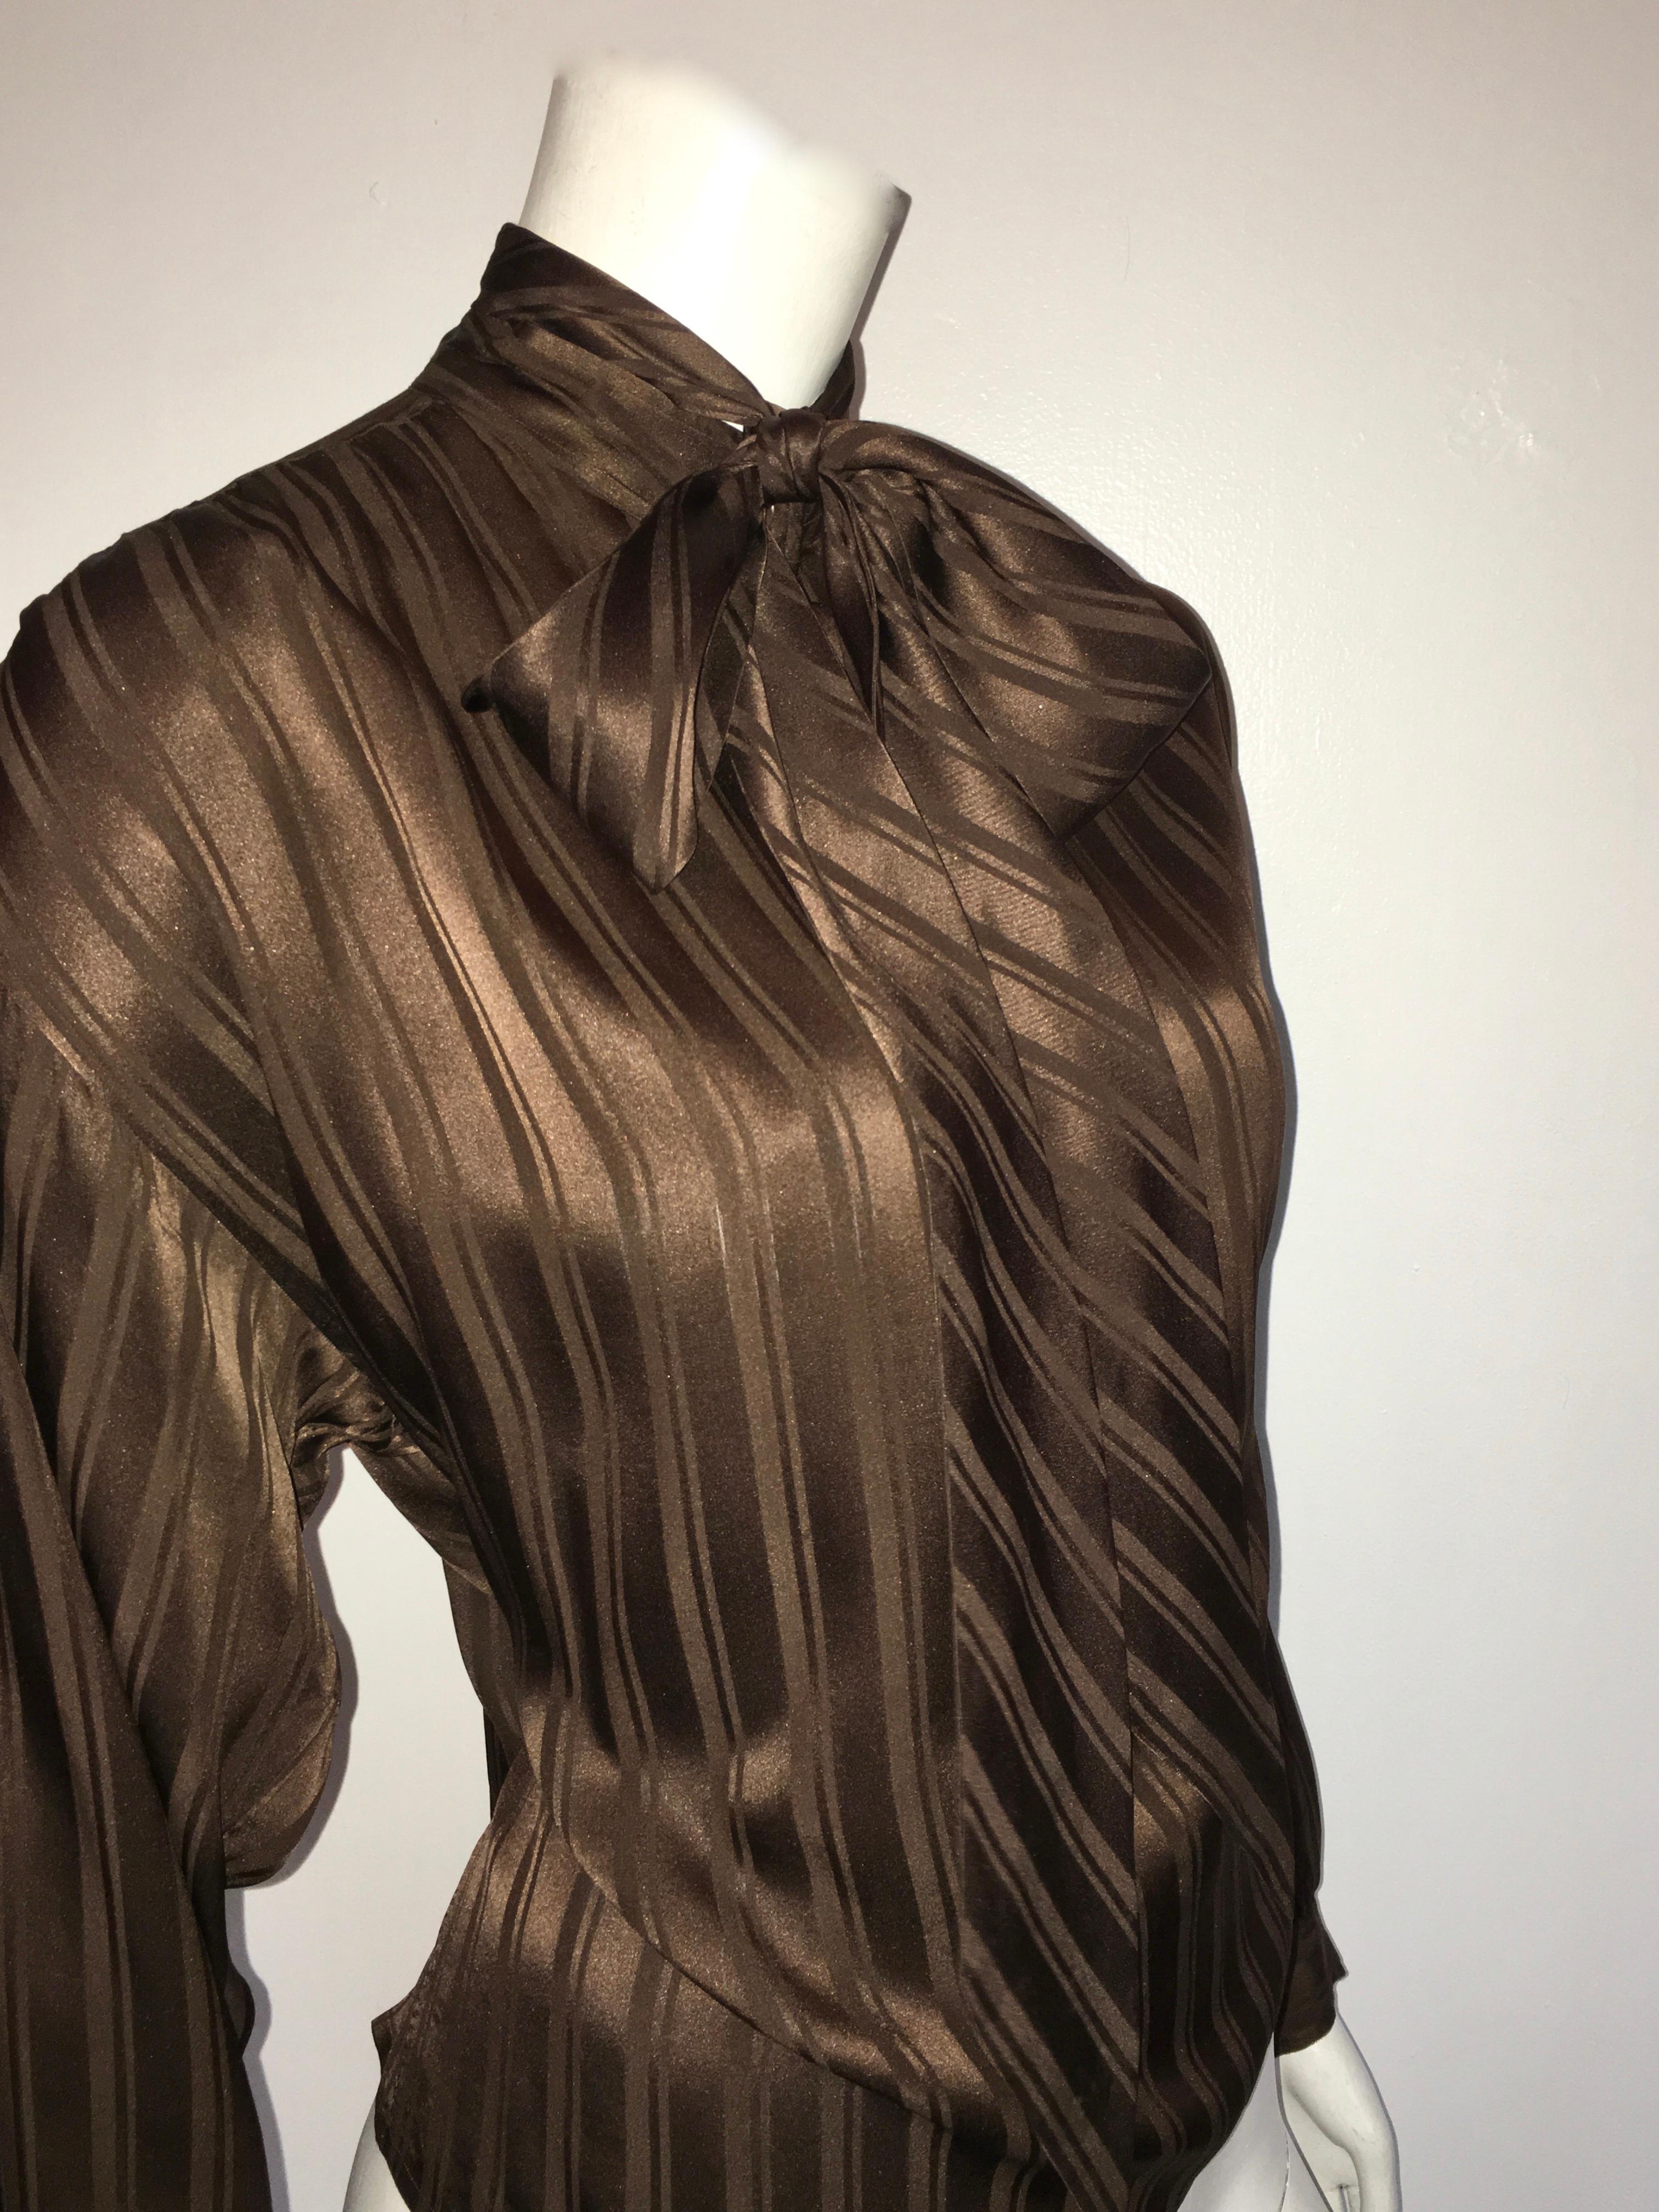 Yves Saint Laurent Rive Gauche 1970s Brown Silk Blouse with Tie Size Large.  For Sale 2